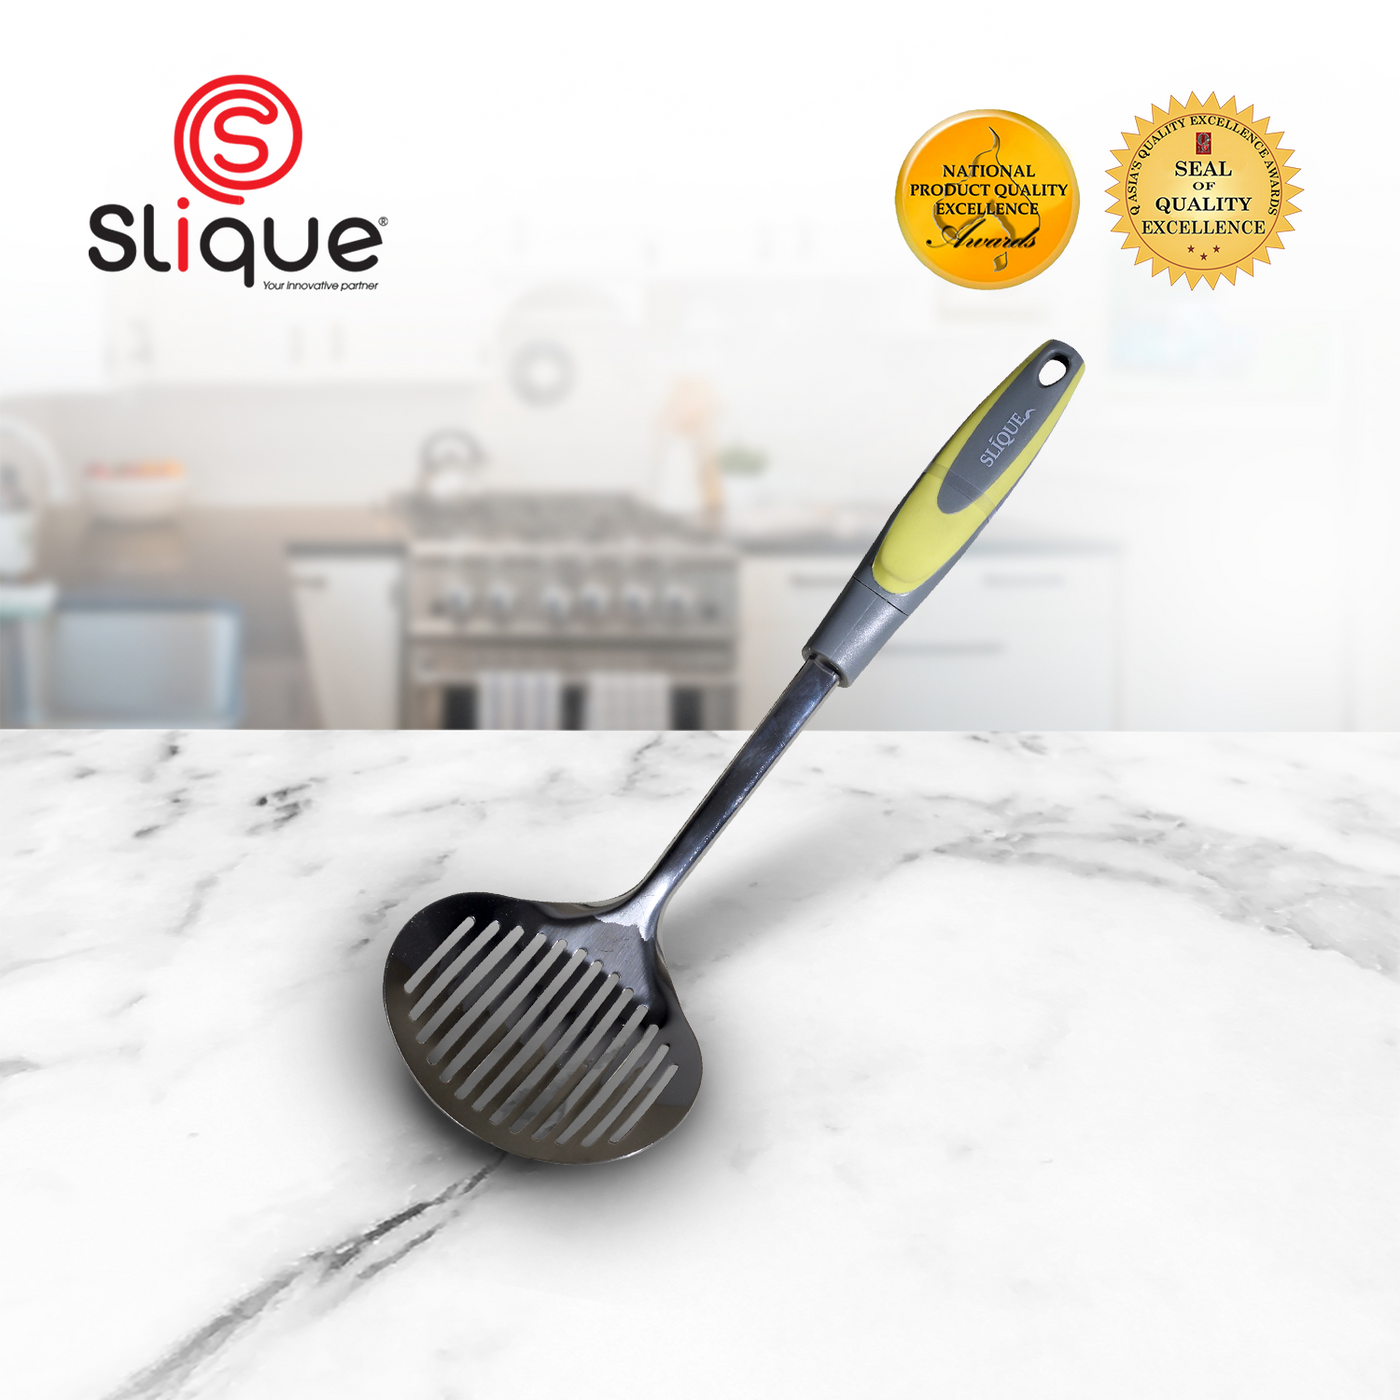 SLIQUE Premium 18/8 Stainless Steel Skimmer TPR Silicone Handle Kitchen Essentials Amazing Gift Idea For Any Occasion! (Green)